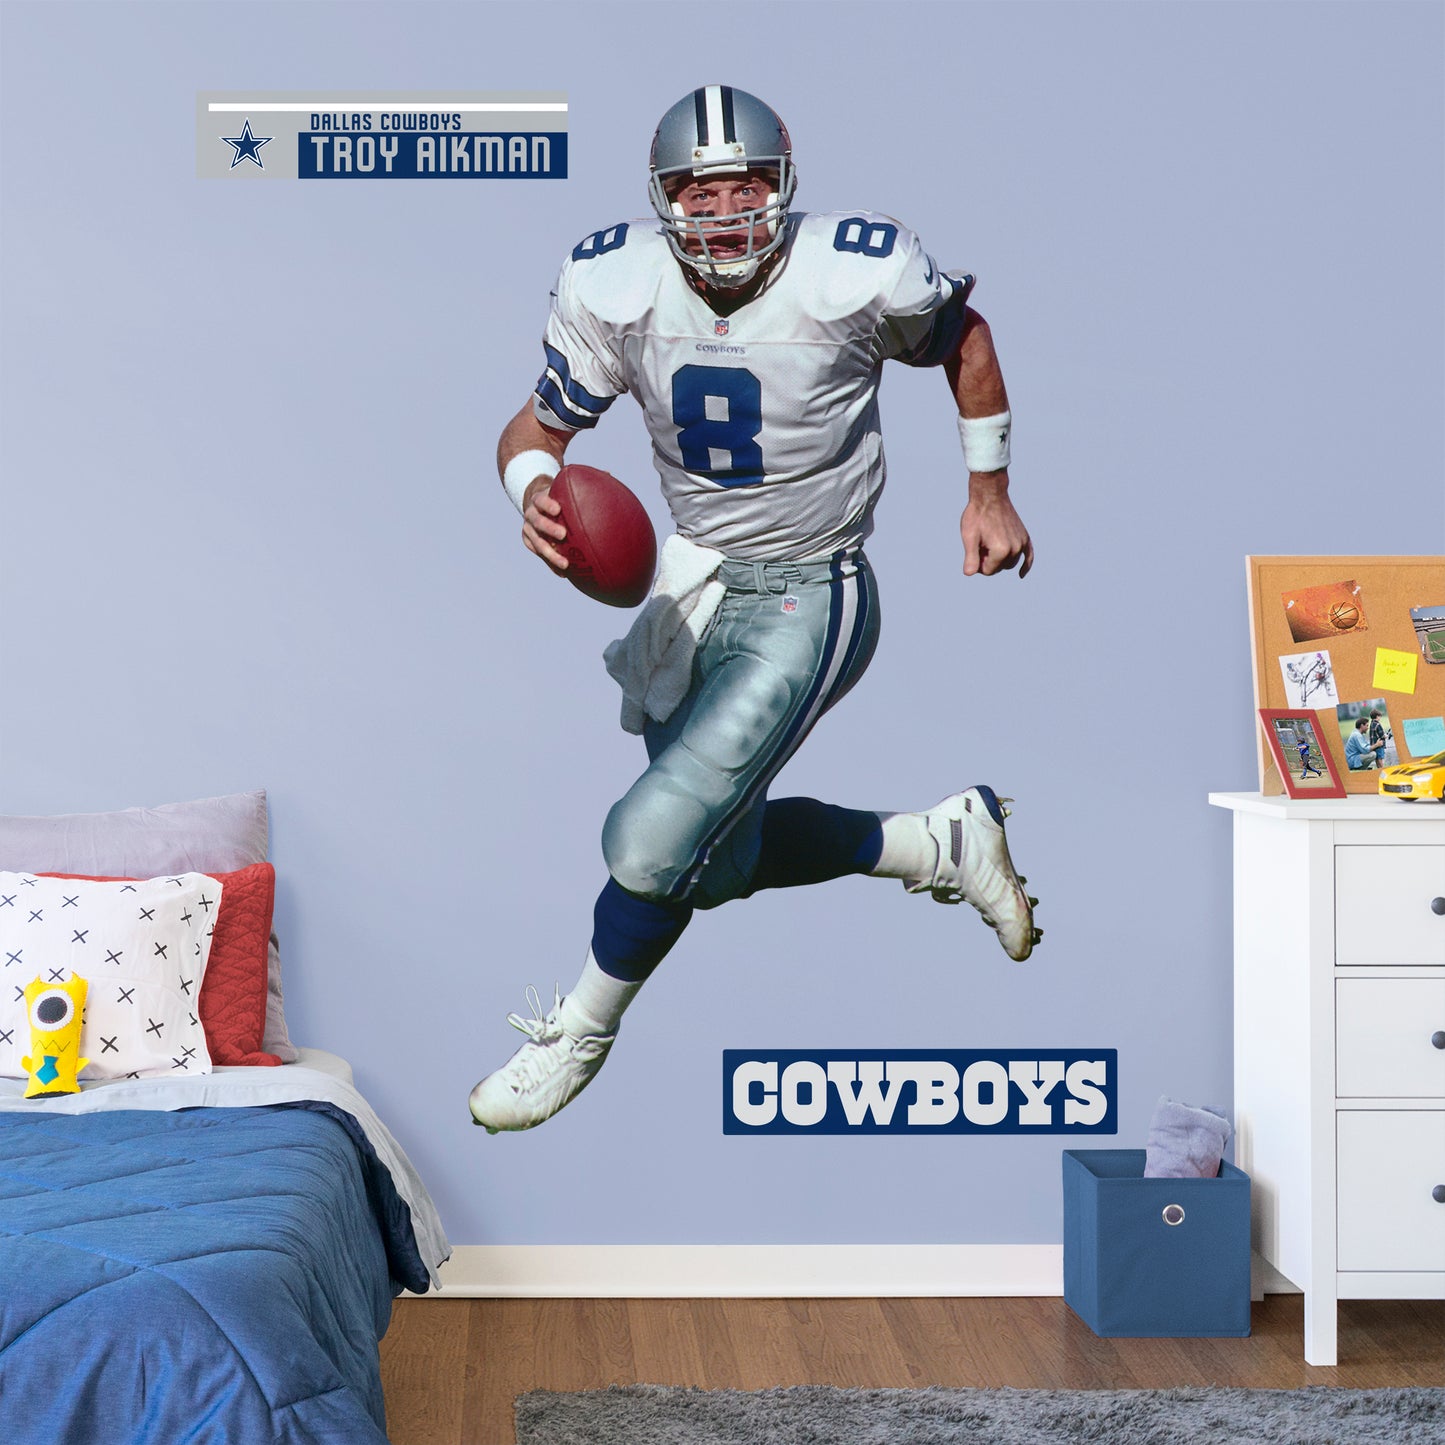 Life-Size Athlete + 2 Decals Quarterback with the Dallas Cowboys for 12 consecutive seasons and inducted in the Pro Football Hall of Fame in 2006, the IceMan can now be memorialized as one of the greats in your den or bedroom with this officially licensed NFL Troy Aikman: Legend removeable wall decal. Featuring the navy blue, metallic silver, royal blue, and white of America's Team no flags will be called for this durable decal that ensures Aikman can be making passes for seasons to come.